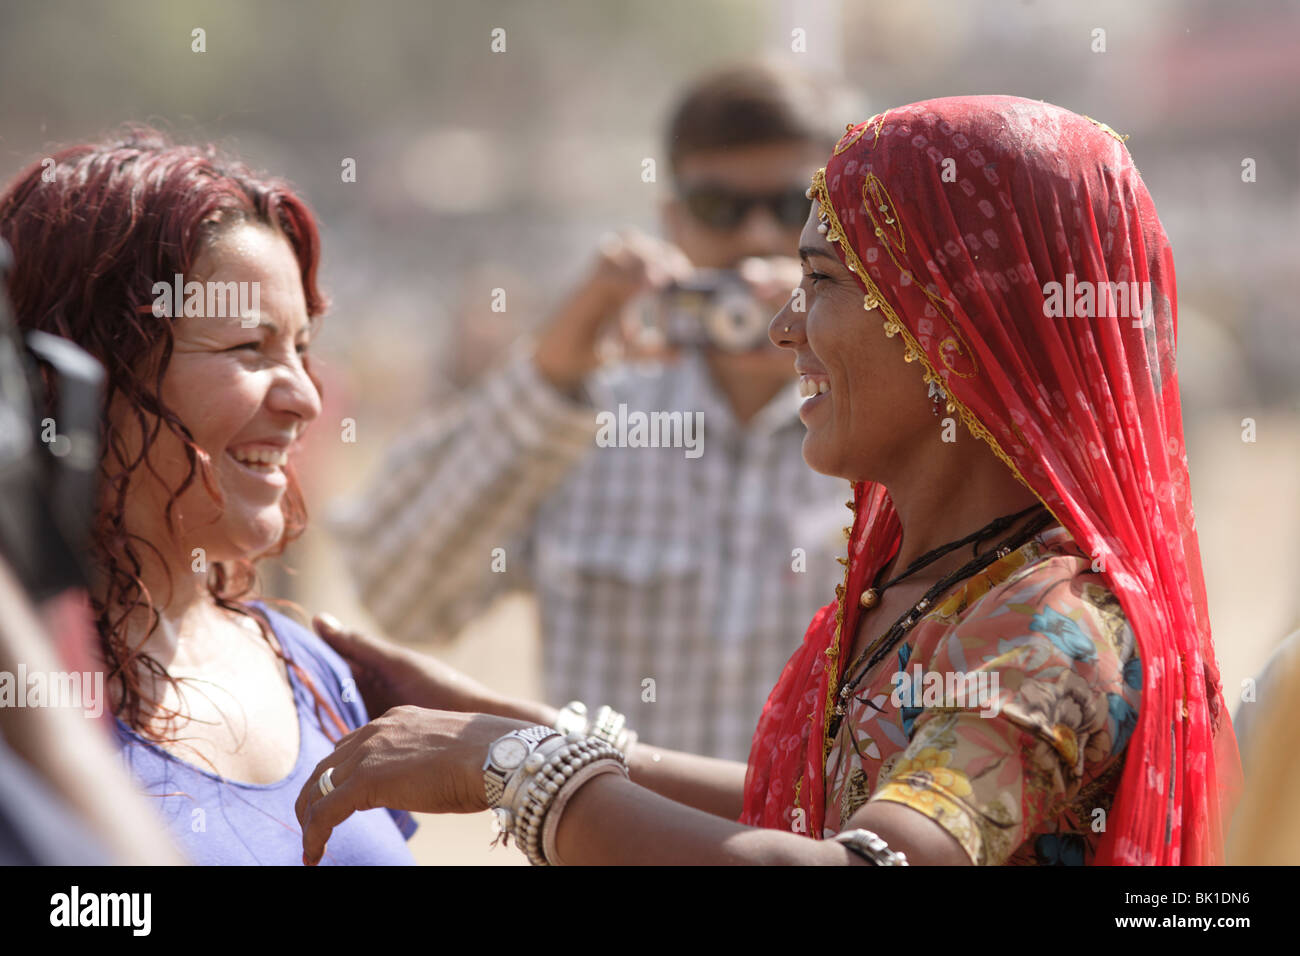 Indian and a foreigner lady greeting each other at Pushkar camel race, Rajasthan India. Stock Photo